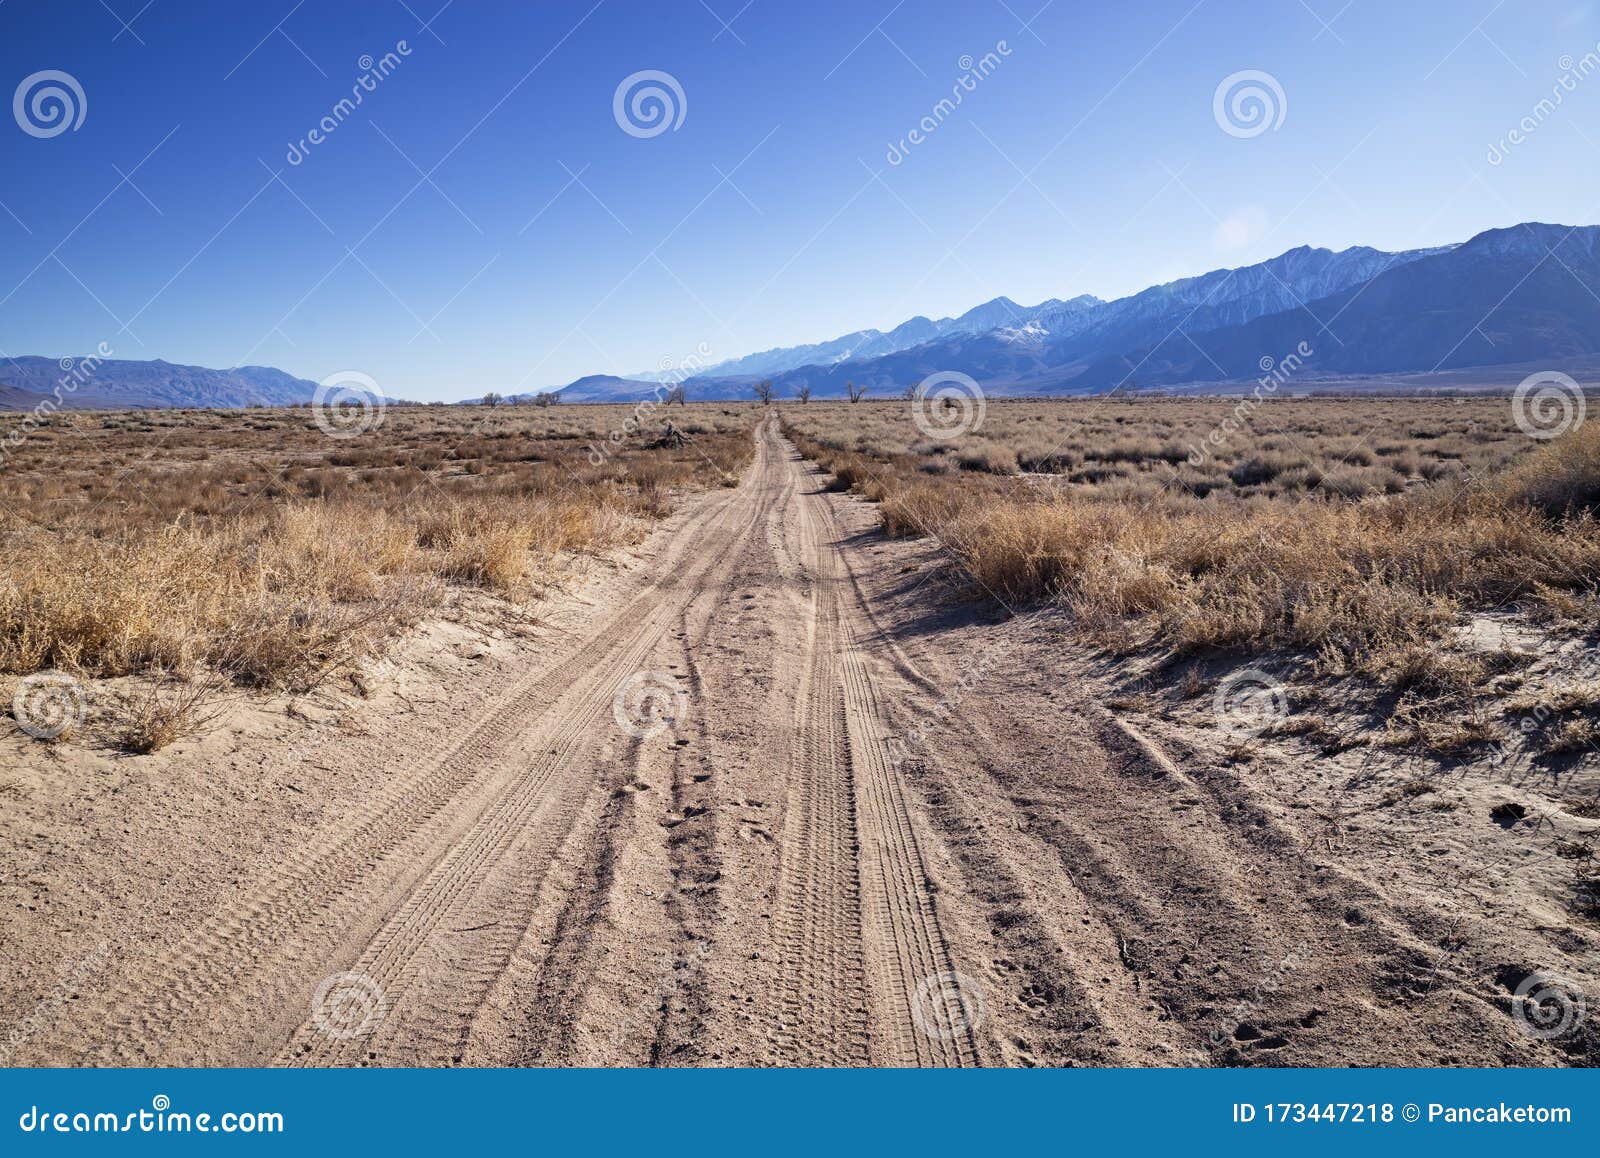 dirt track in owens valley